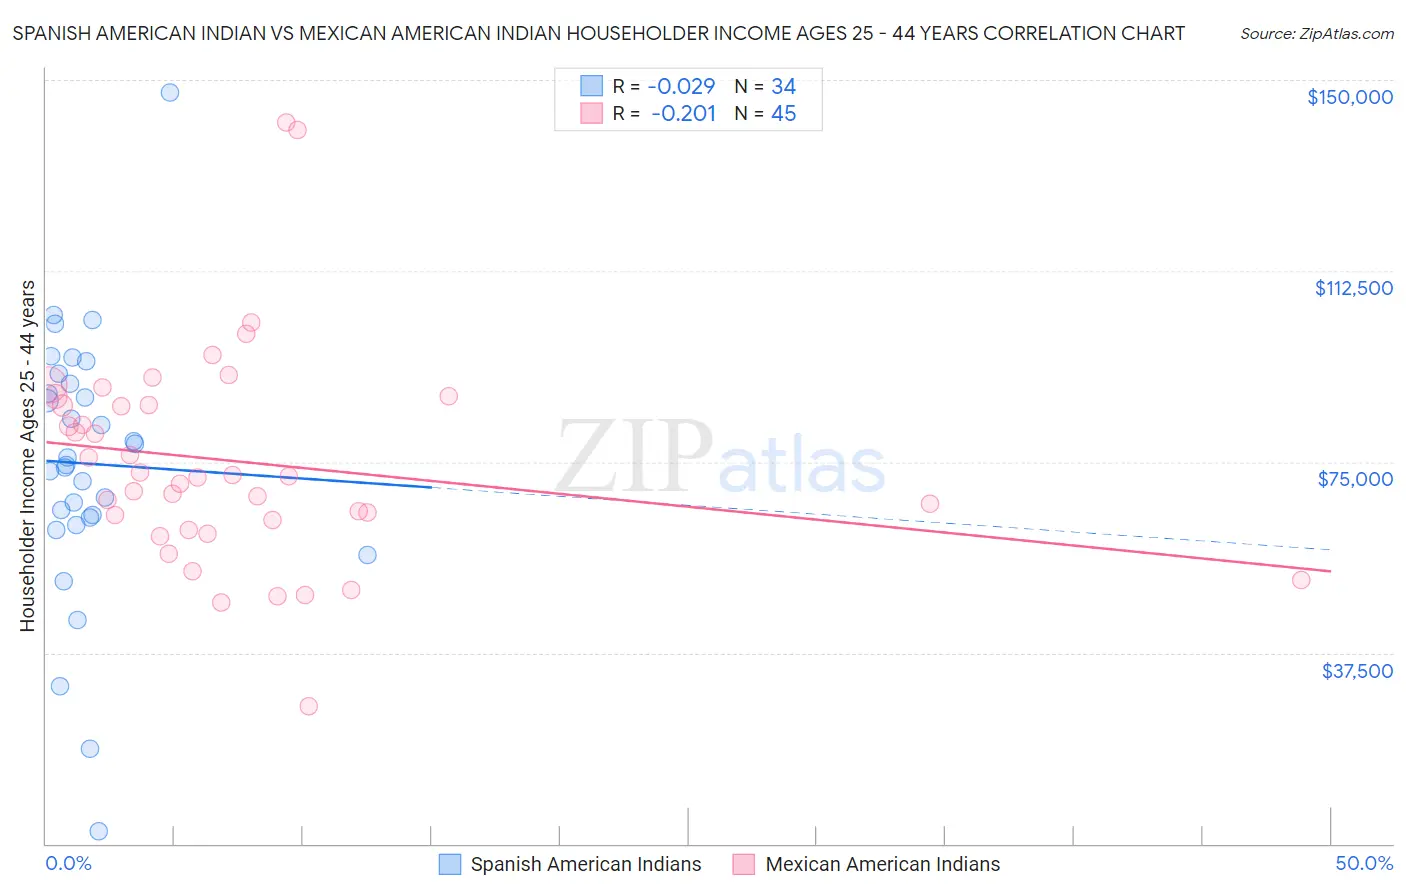 Spanish American Indian vs Mexican American Indian Householder Income Ages 25 - 44 years